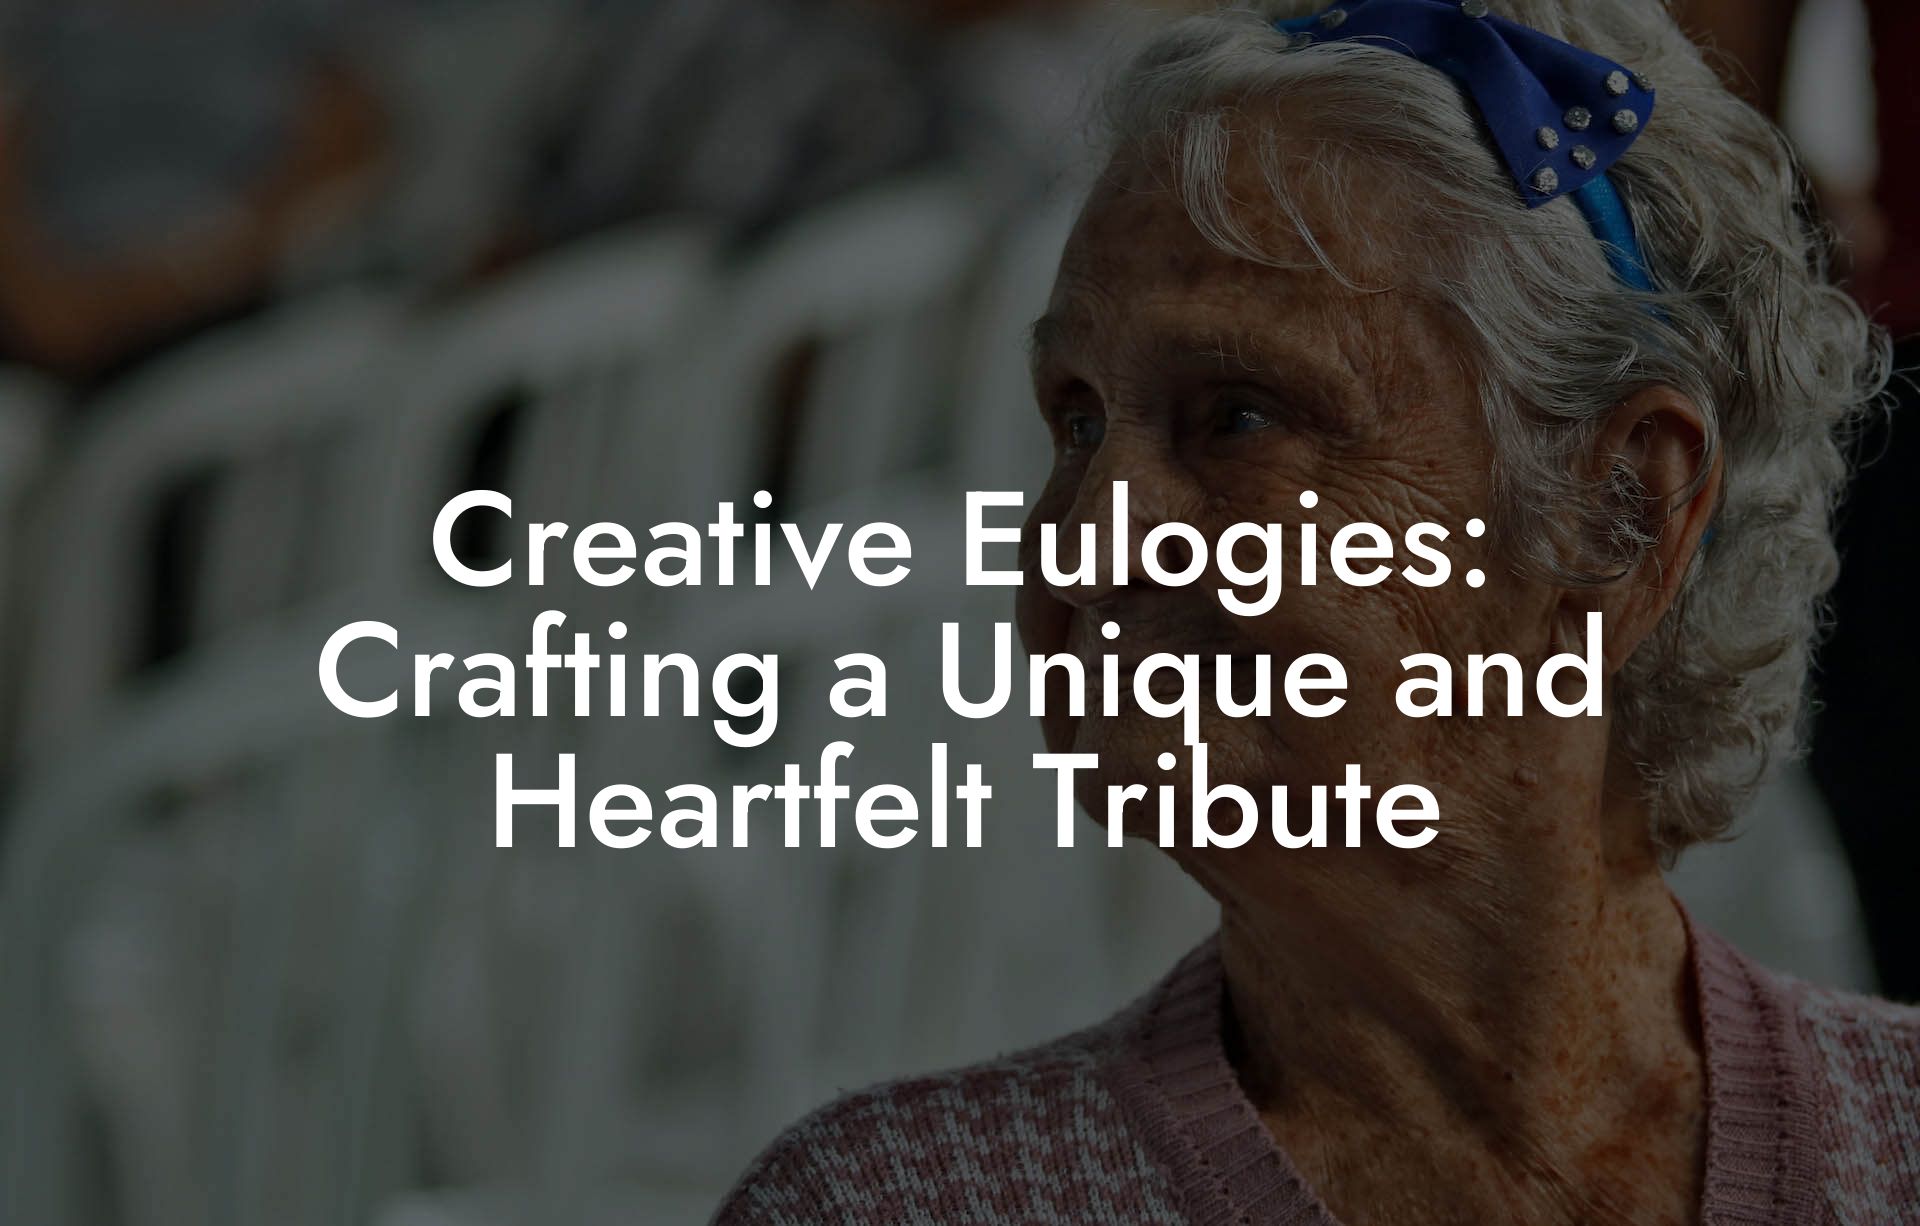 Creative Eulogies: Crafting a Unique and Heartfelt Tribute